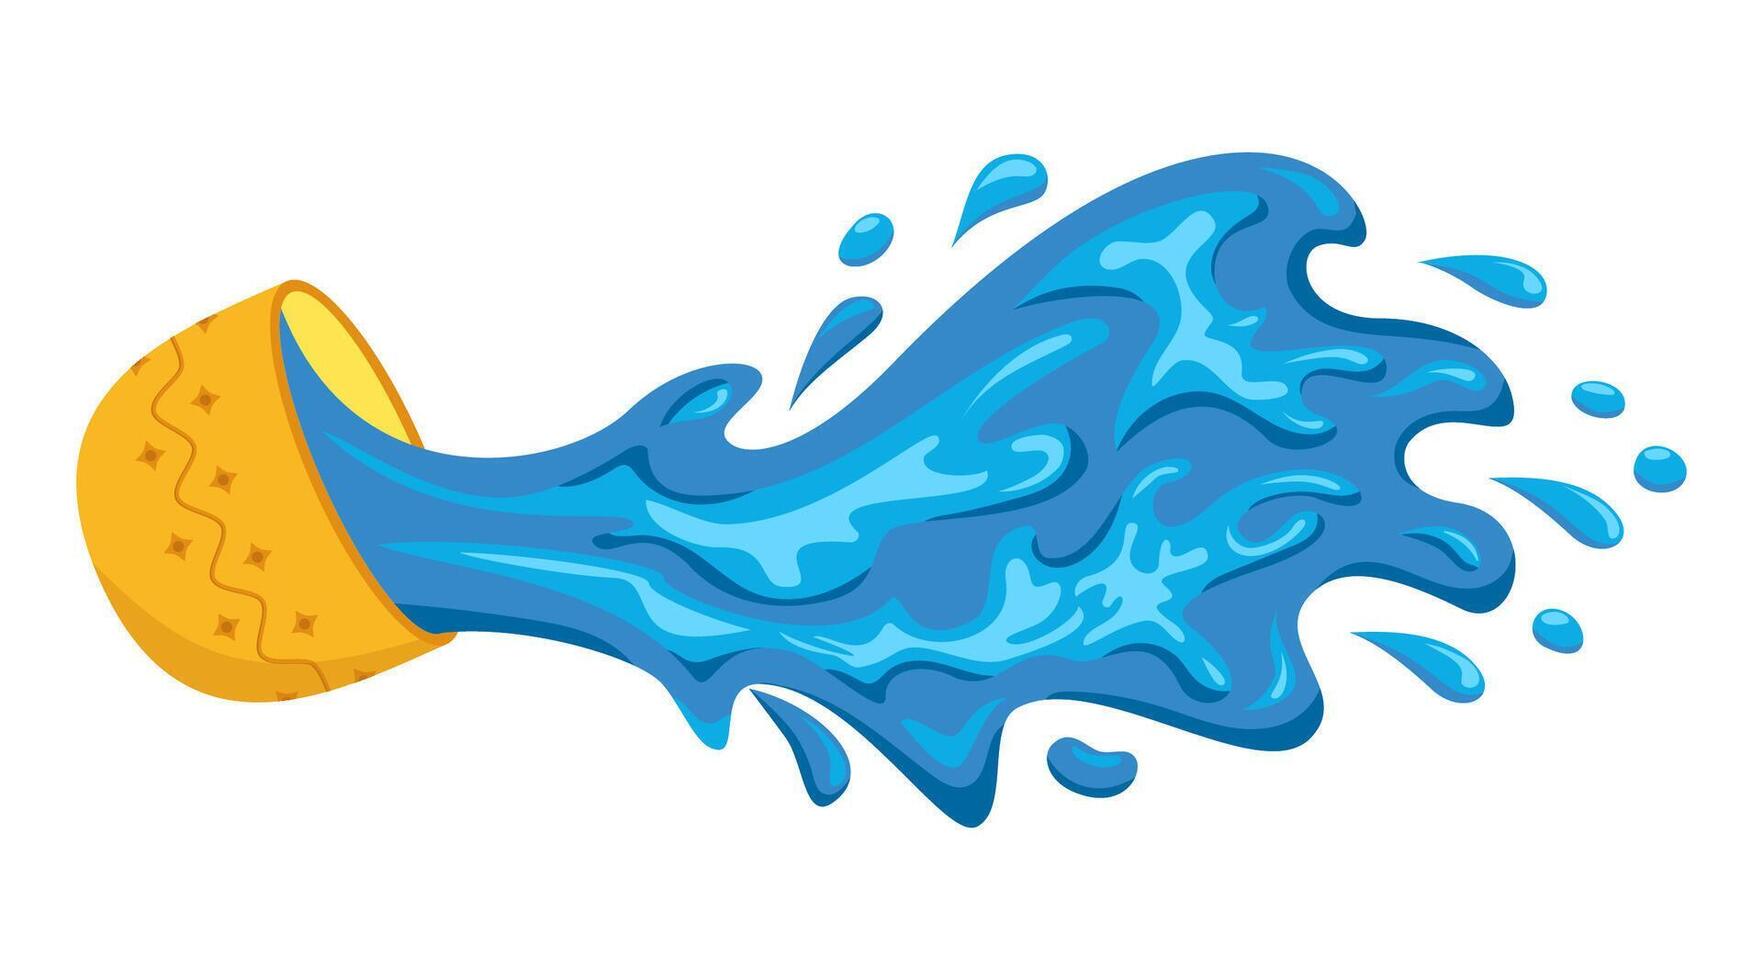 Blue water splashes out of a golden bowl. Water drinking bowl, cup. Concept for Songkran water festival. Thailand New Year's day. Cartoon vector illustration